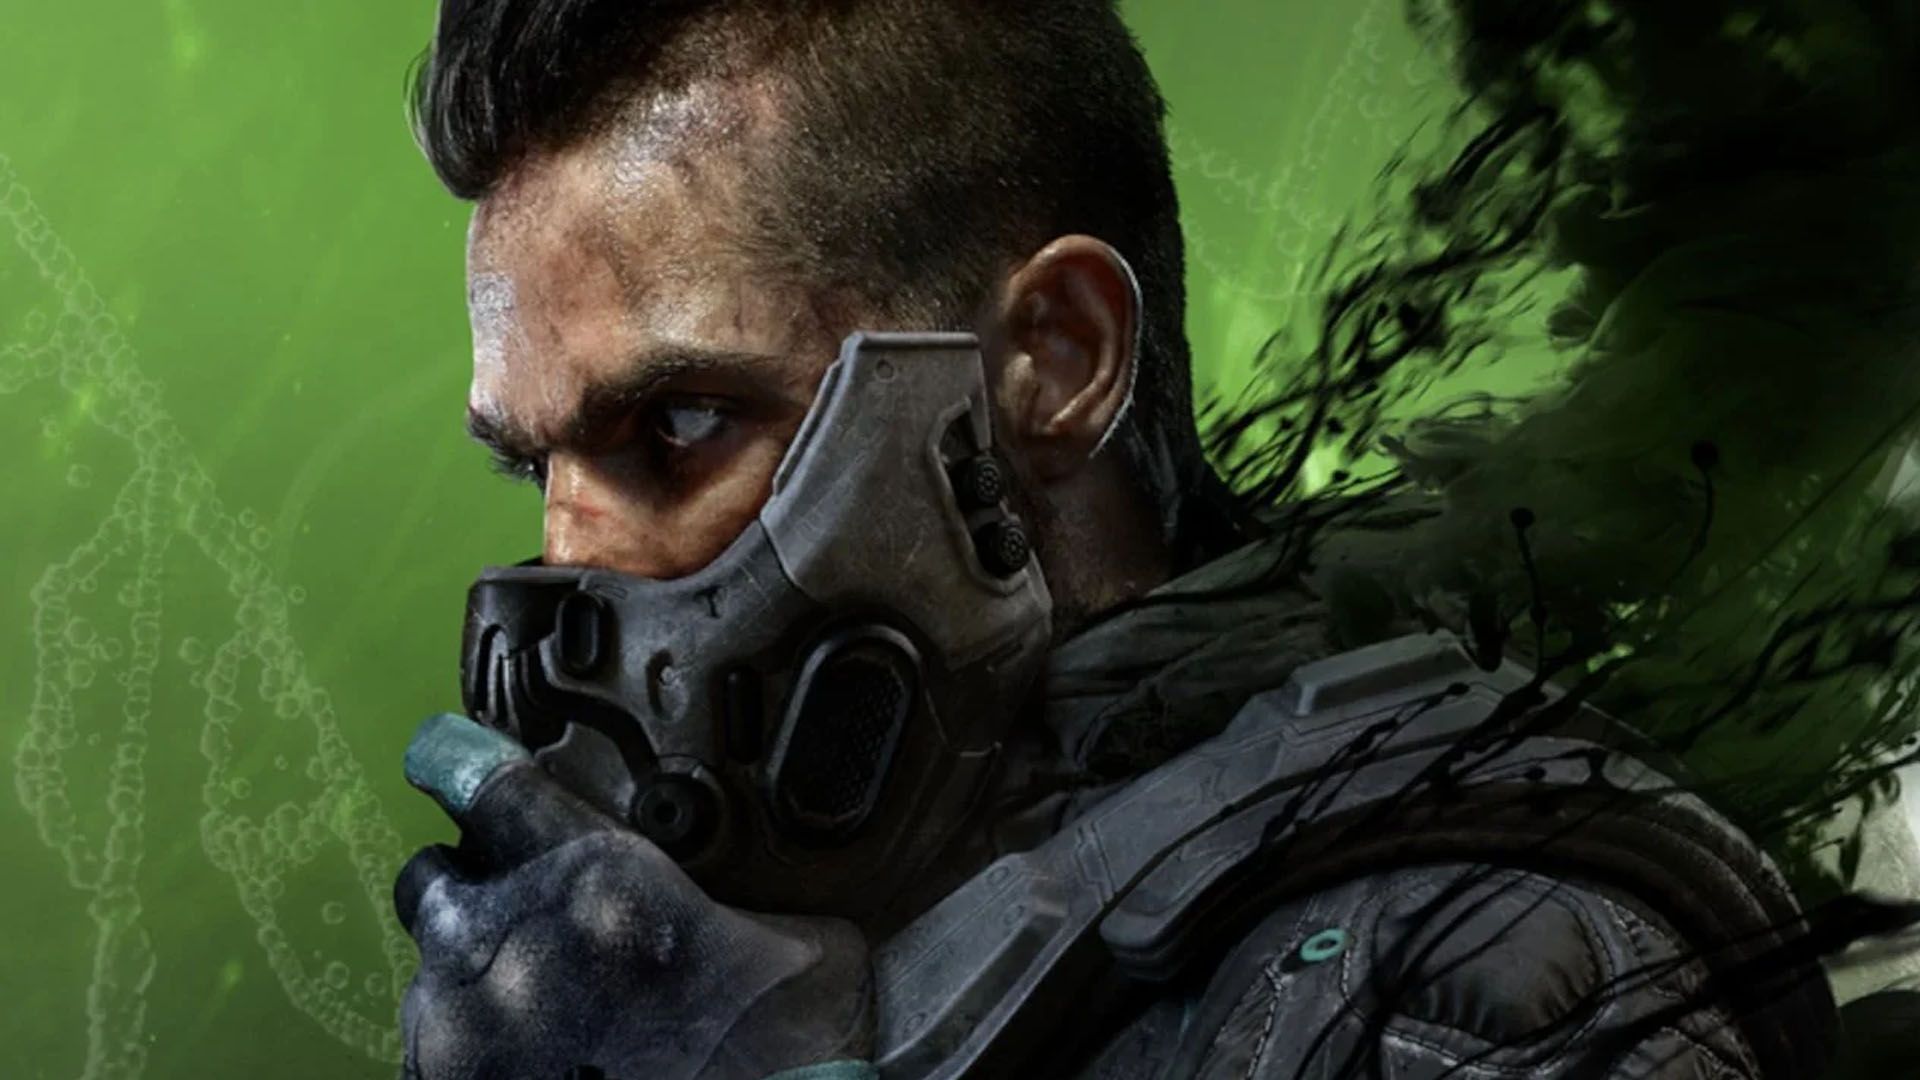 Modern Warfare 3 Soap wearing a gas mask on a pale green and black background